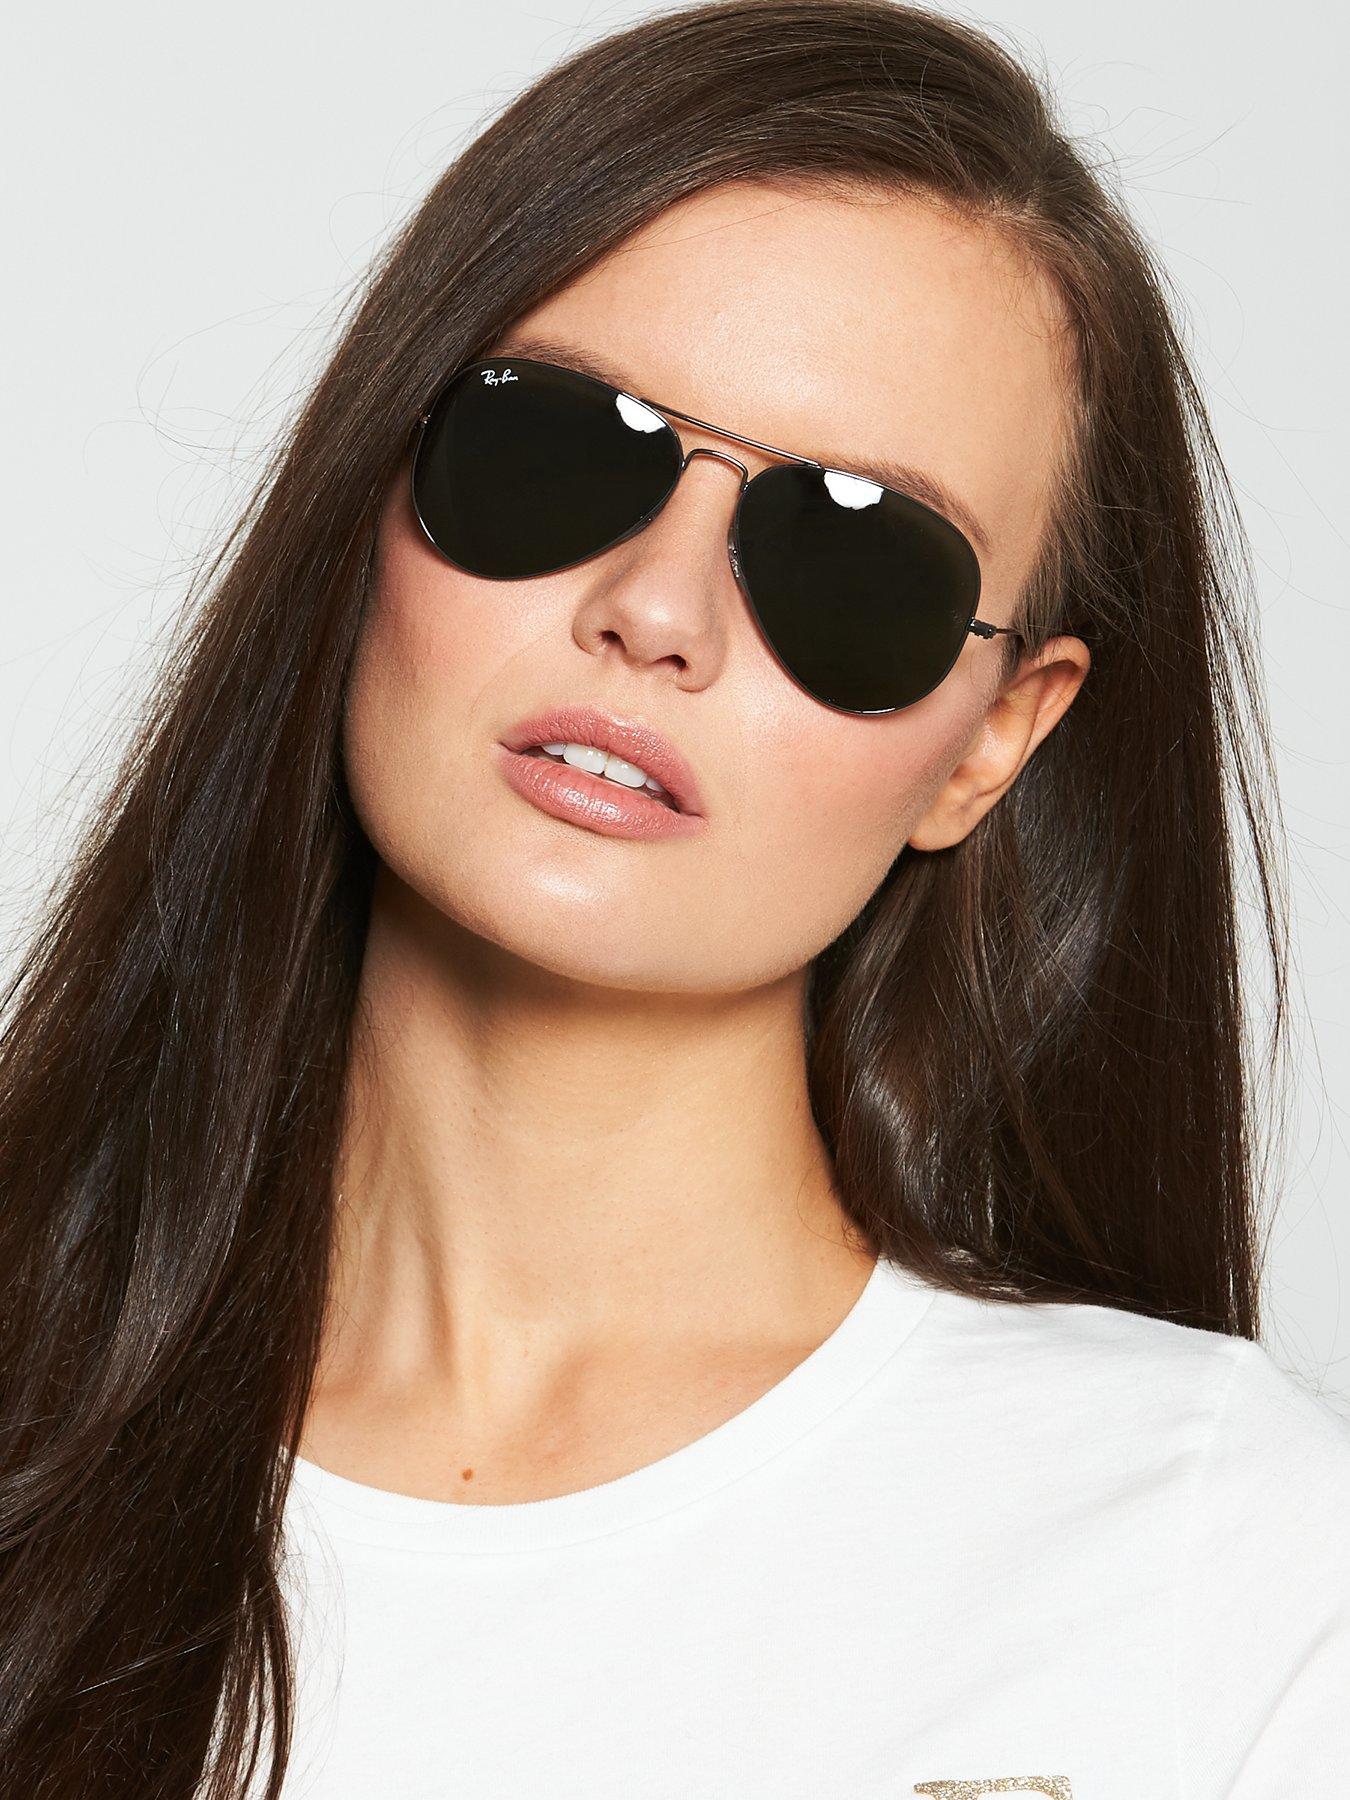 ray ban outlet uk